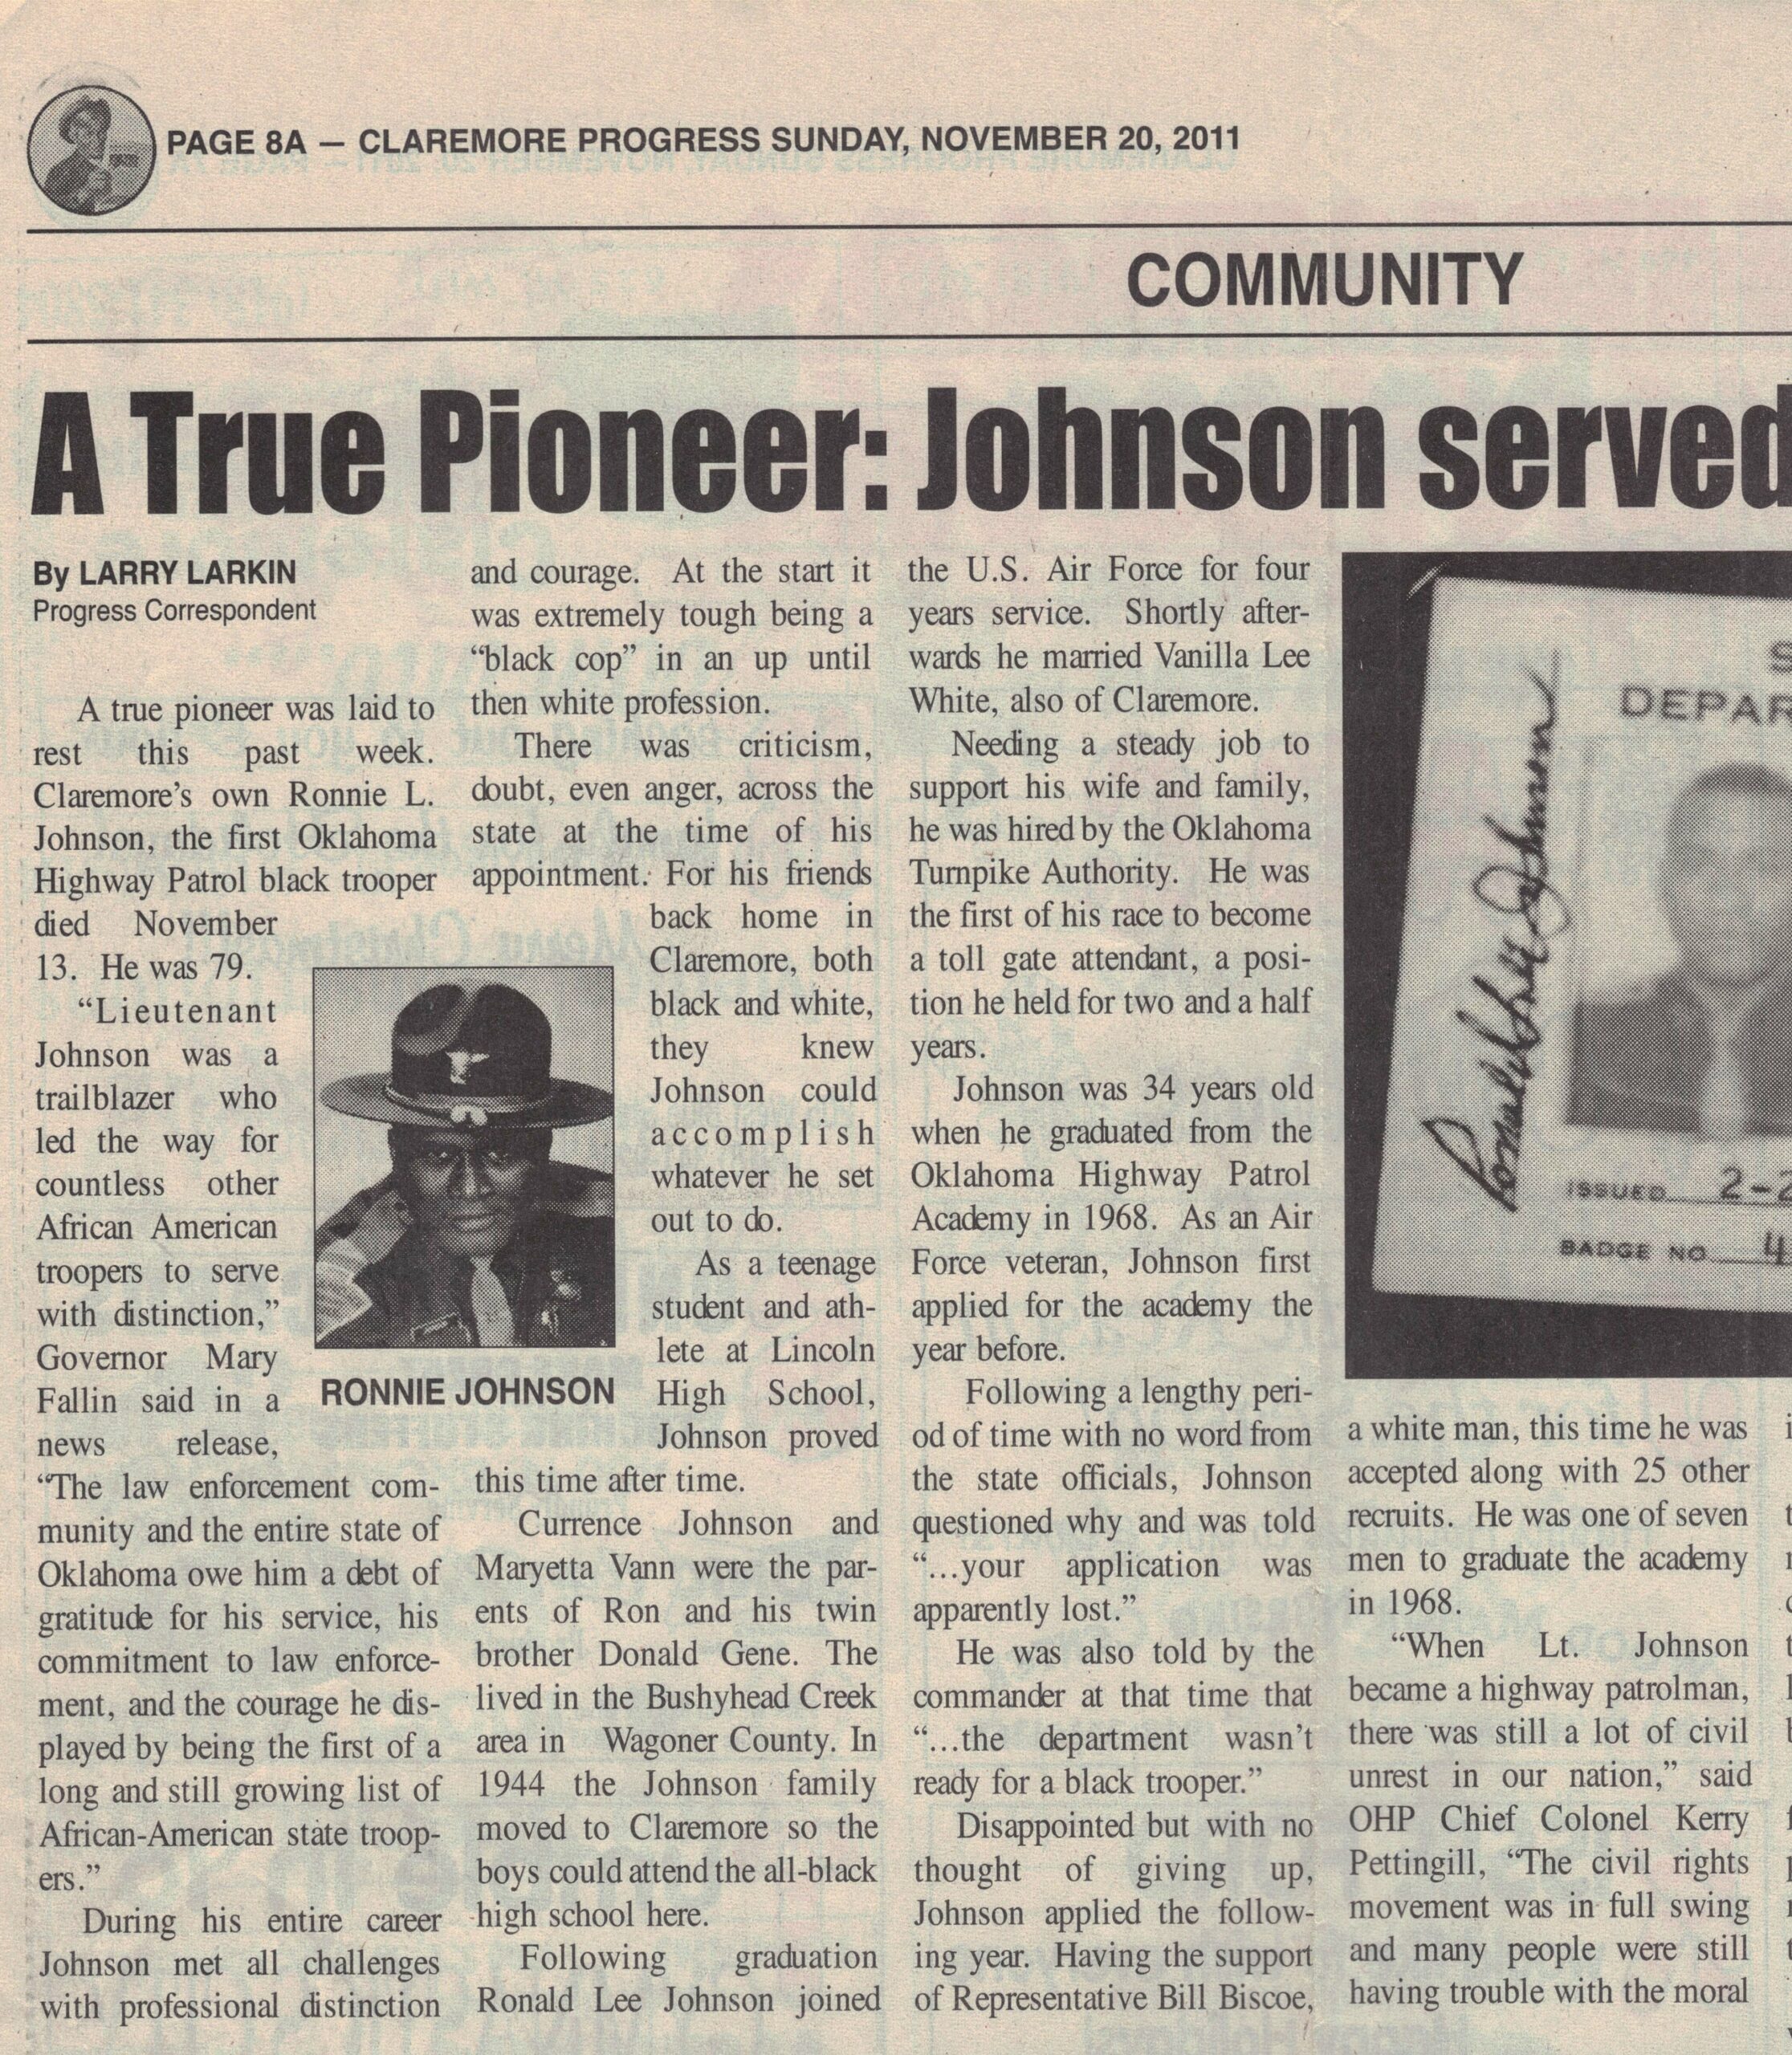 Four columns of article text with picture of Black highway patrolman in uniform under article title and newspaper header.